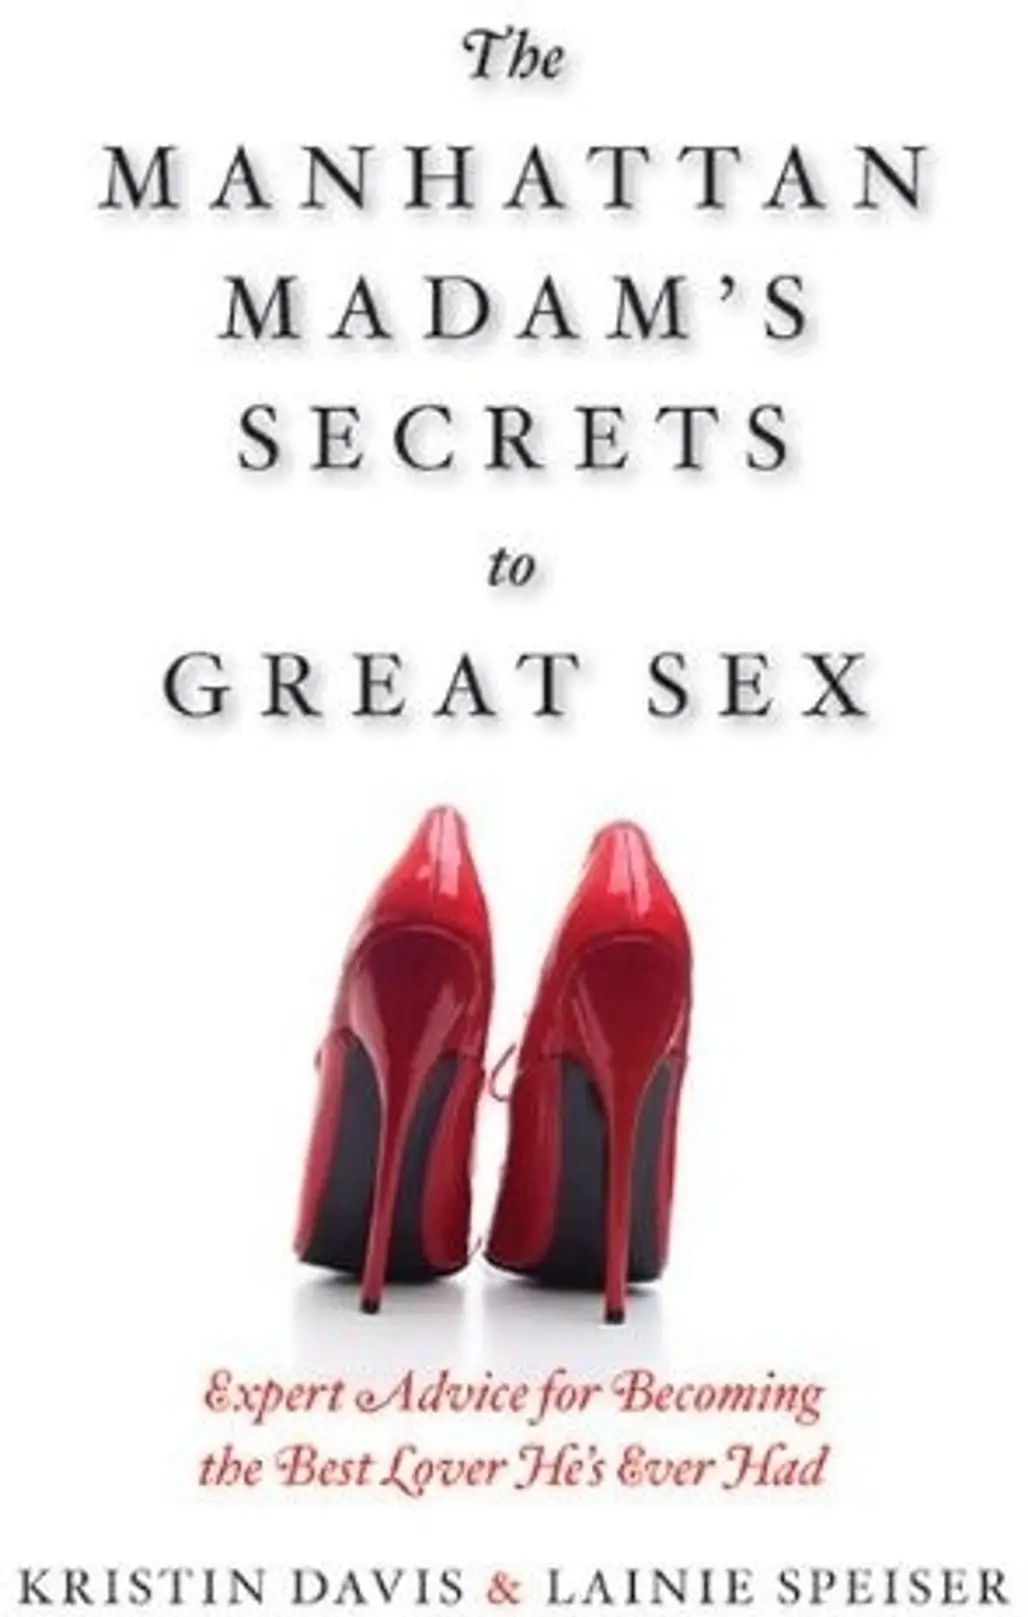 The Manhattan Madam's Secrets to Great Sex: Expert Advice for Becoming the Best Lover He's Ever Had